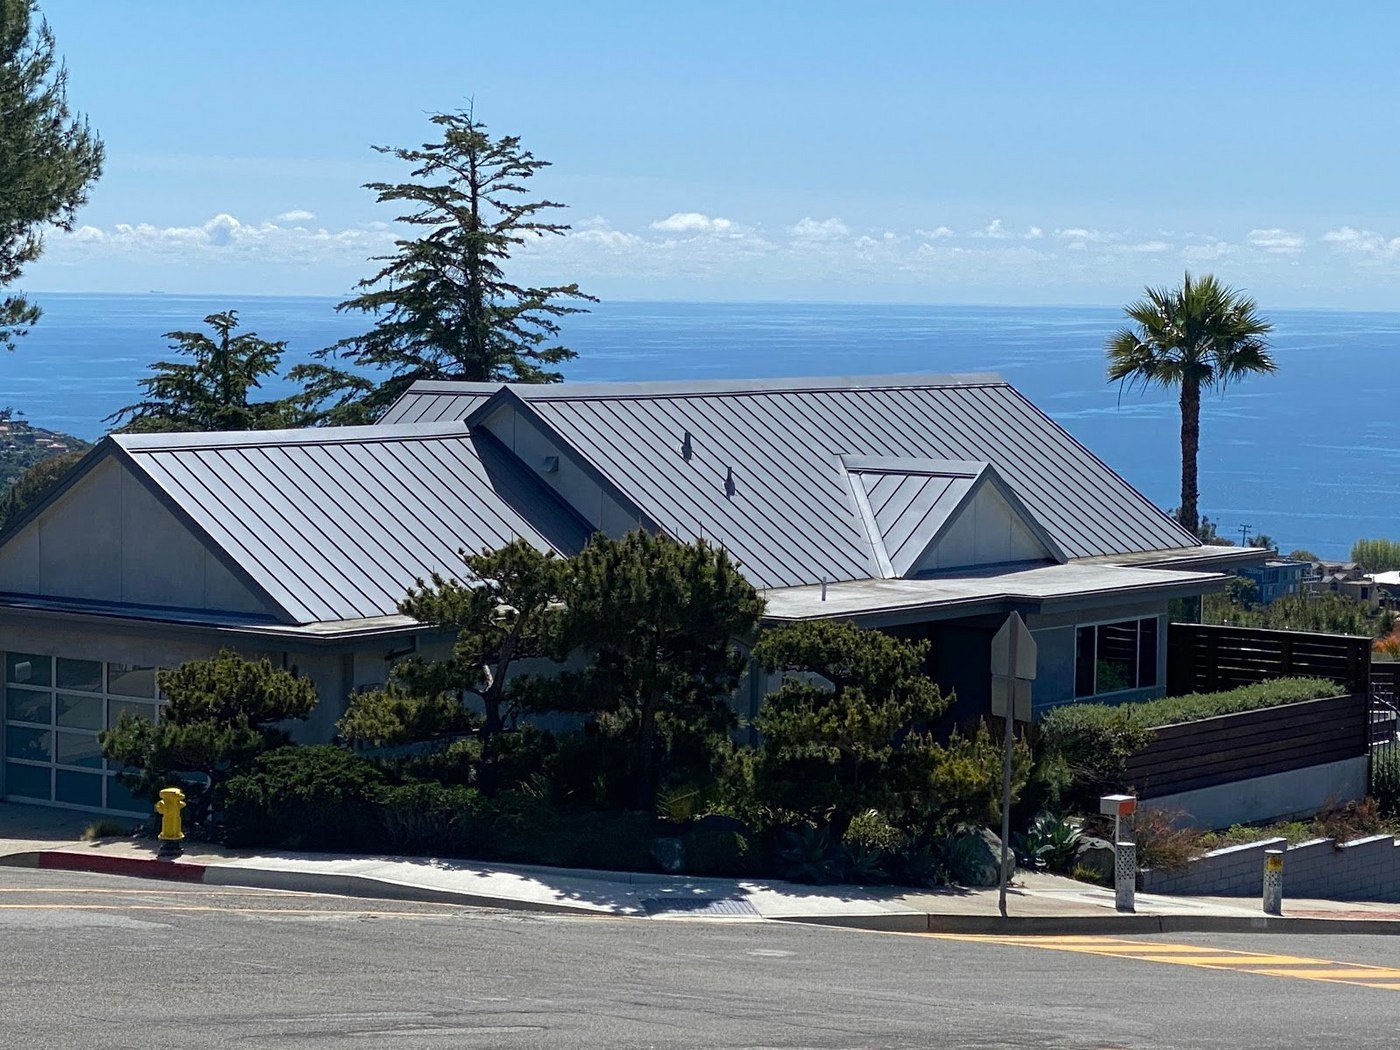 Western States Metal Roofing Launches New Website For Aluminum Roofing Products